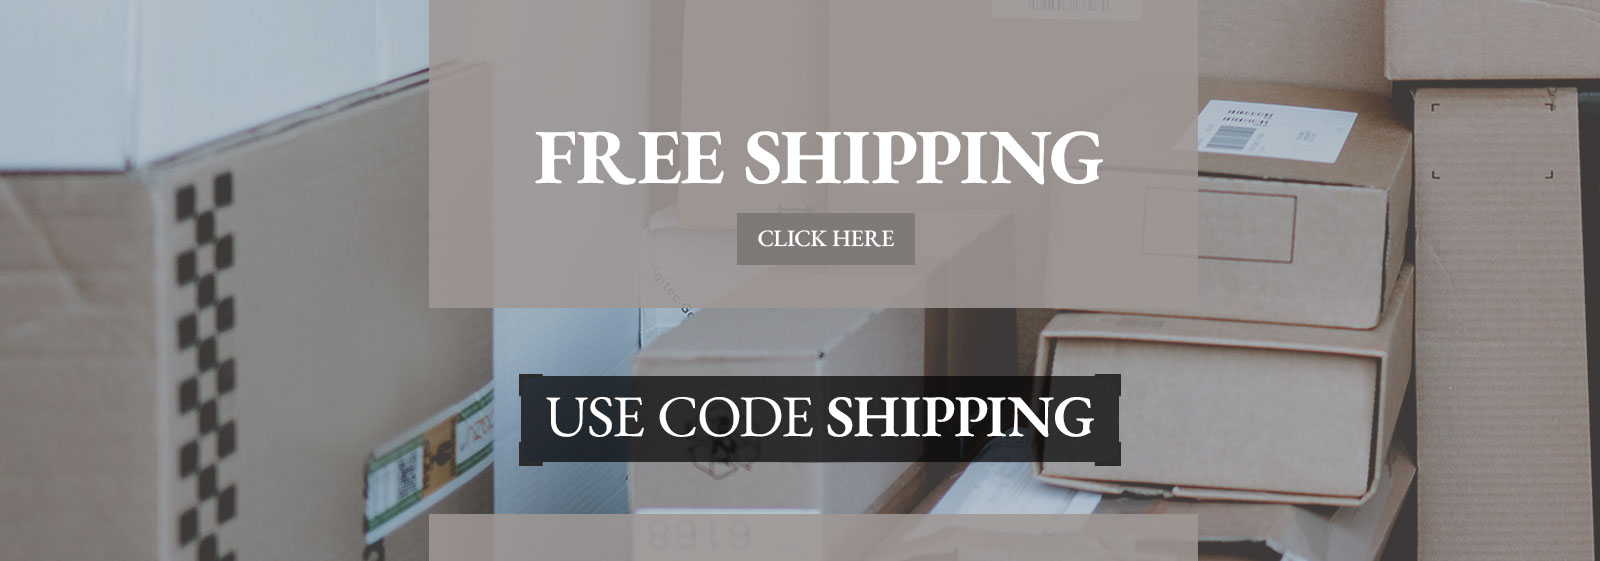 Free Shipping - Use Code SHIPPING for Free Shipping